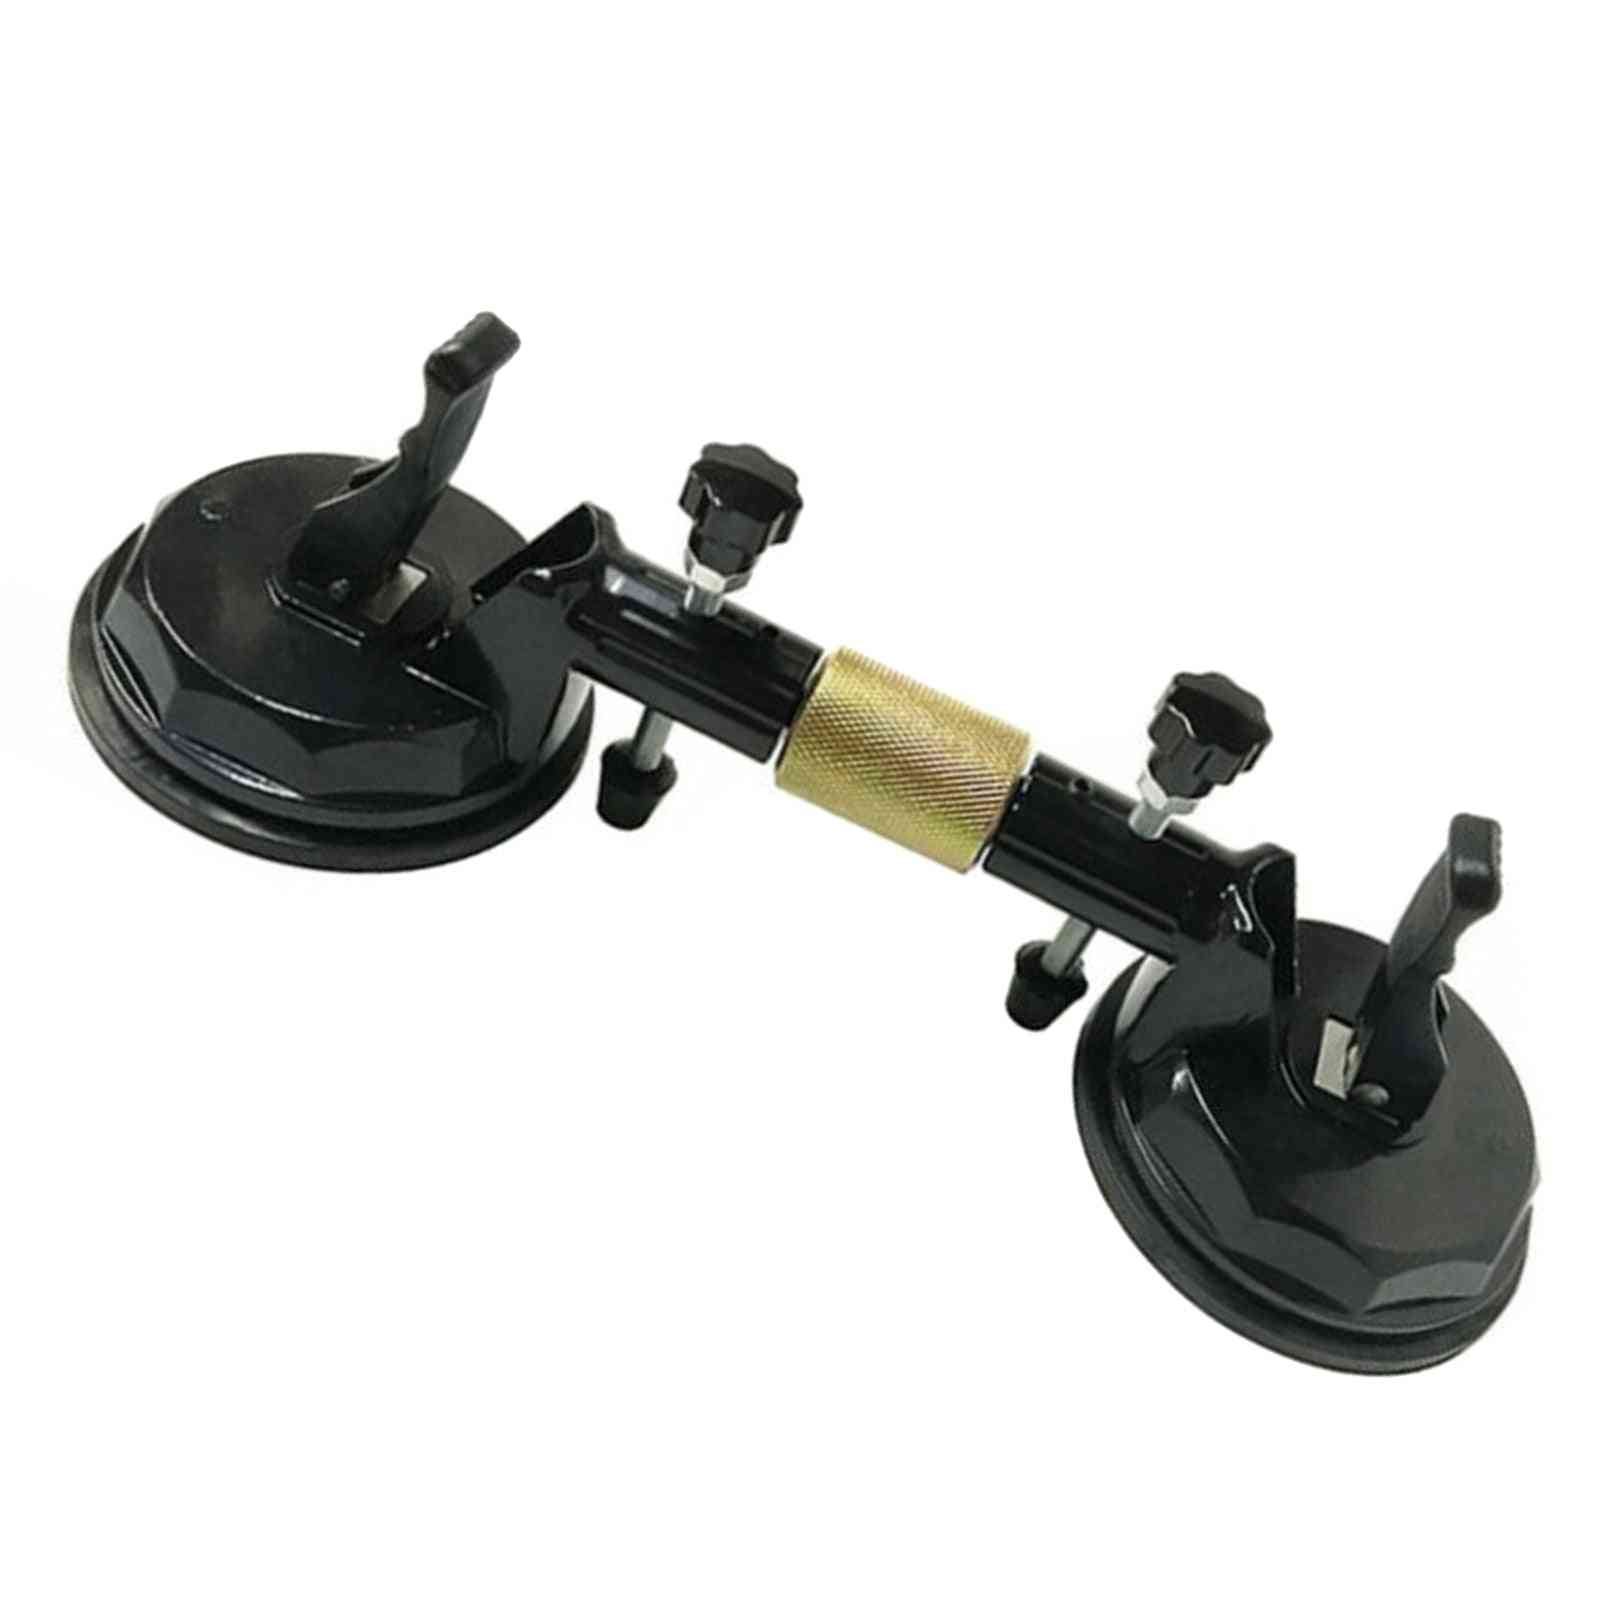 Suction Cup Stone Seam Setter For Pulling And Aligning Tiles